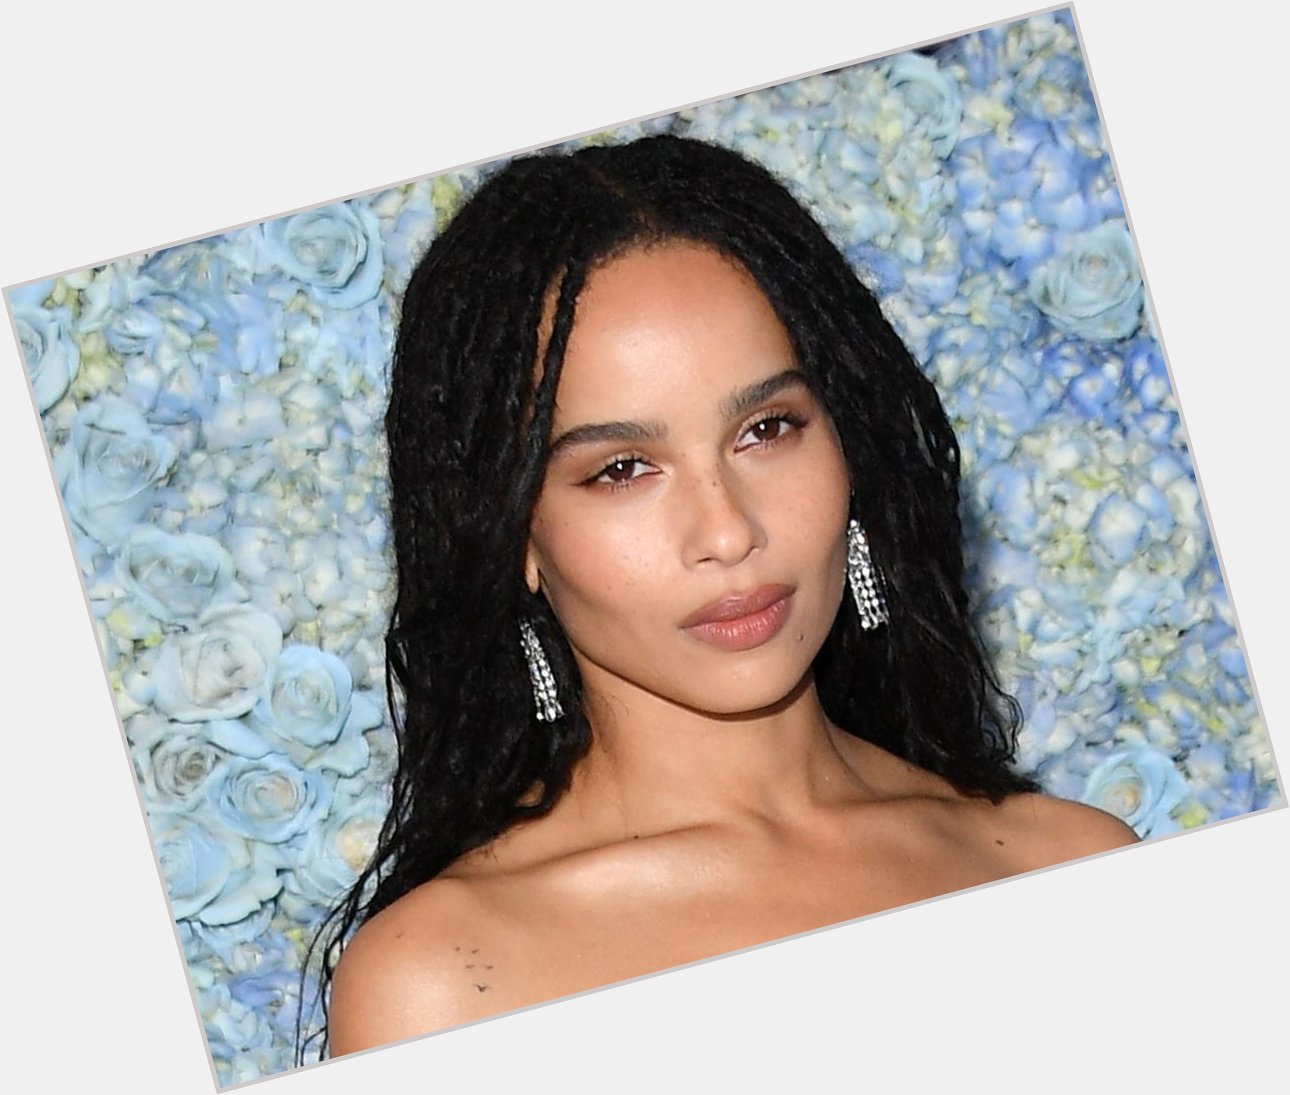 Happy Birthday to the baddest. We love you Zoë Kravitz and can t wait to see you in The Batman 